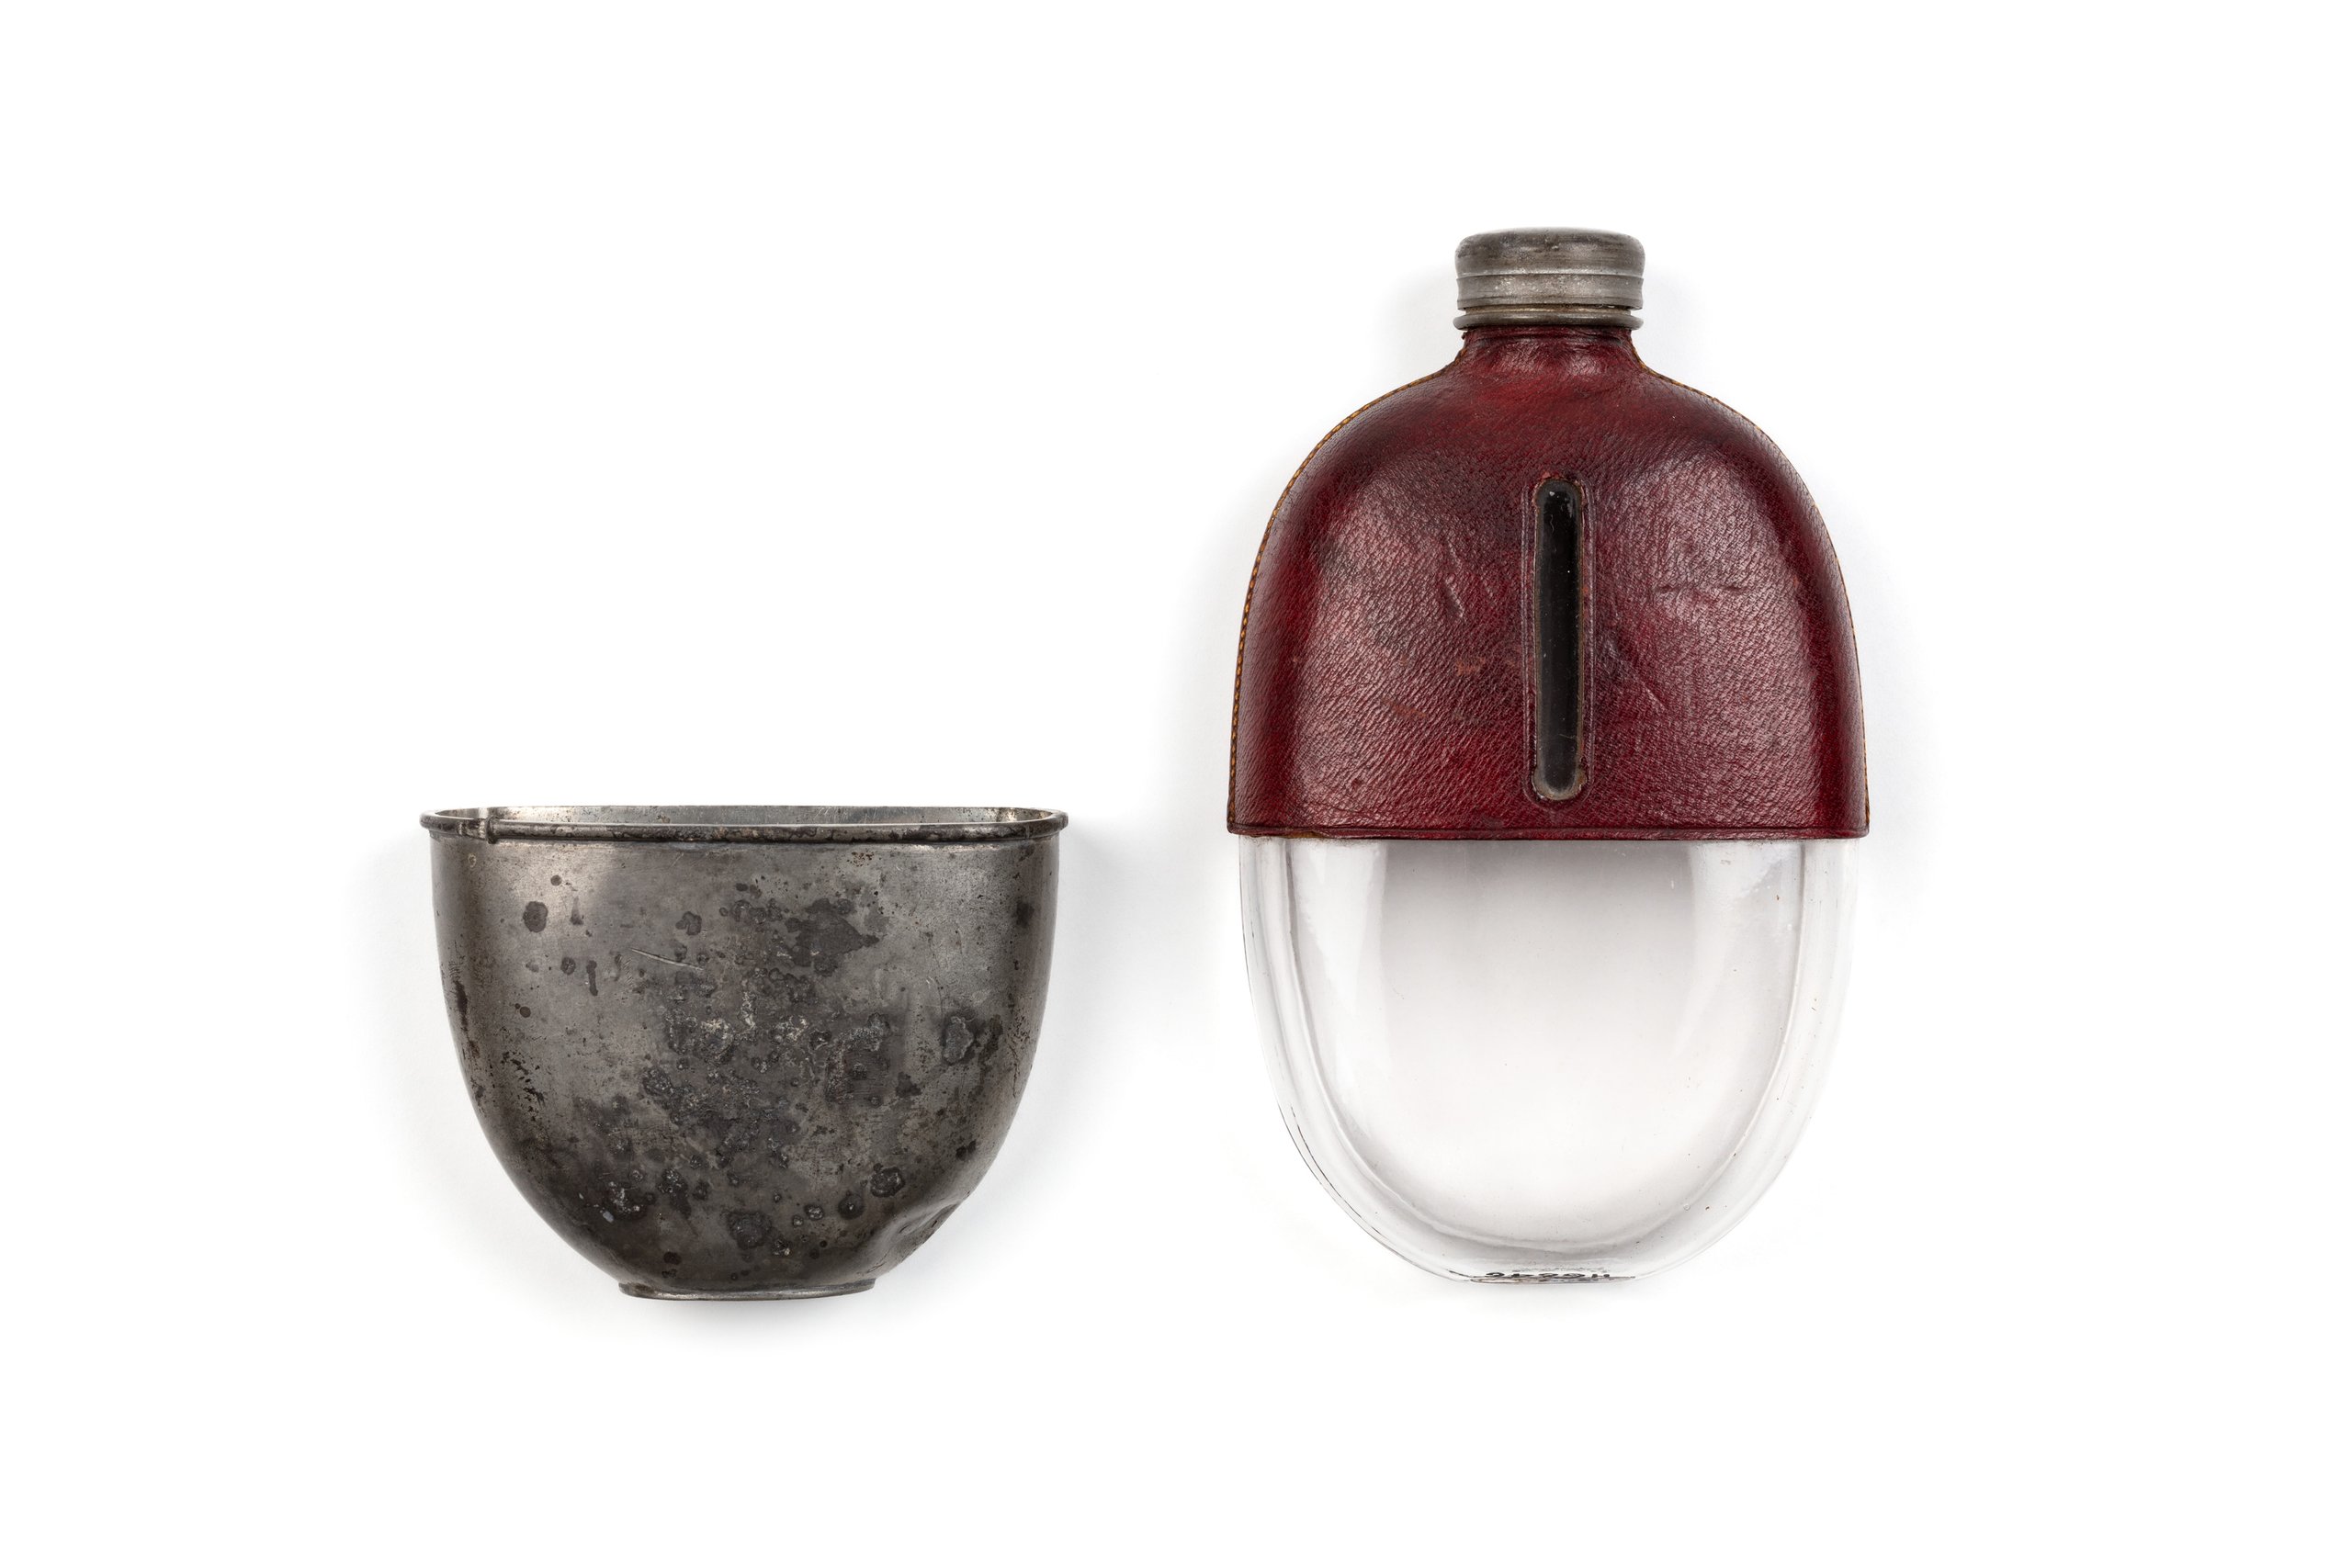 Oval shaped glass brandy flask with a red leather and metal cover